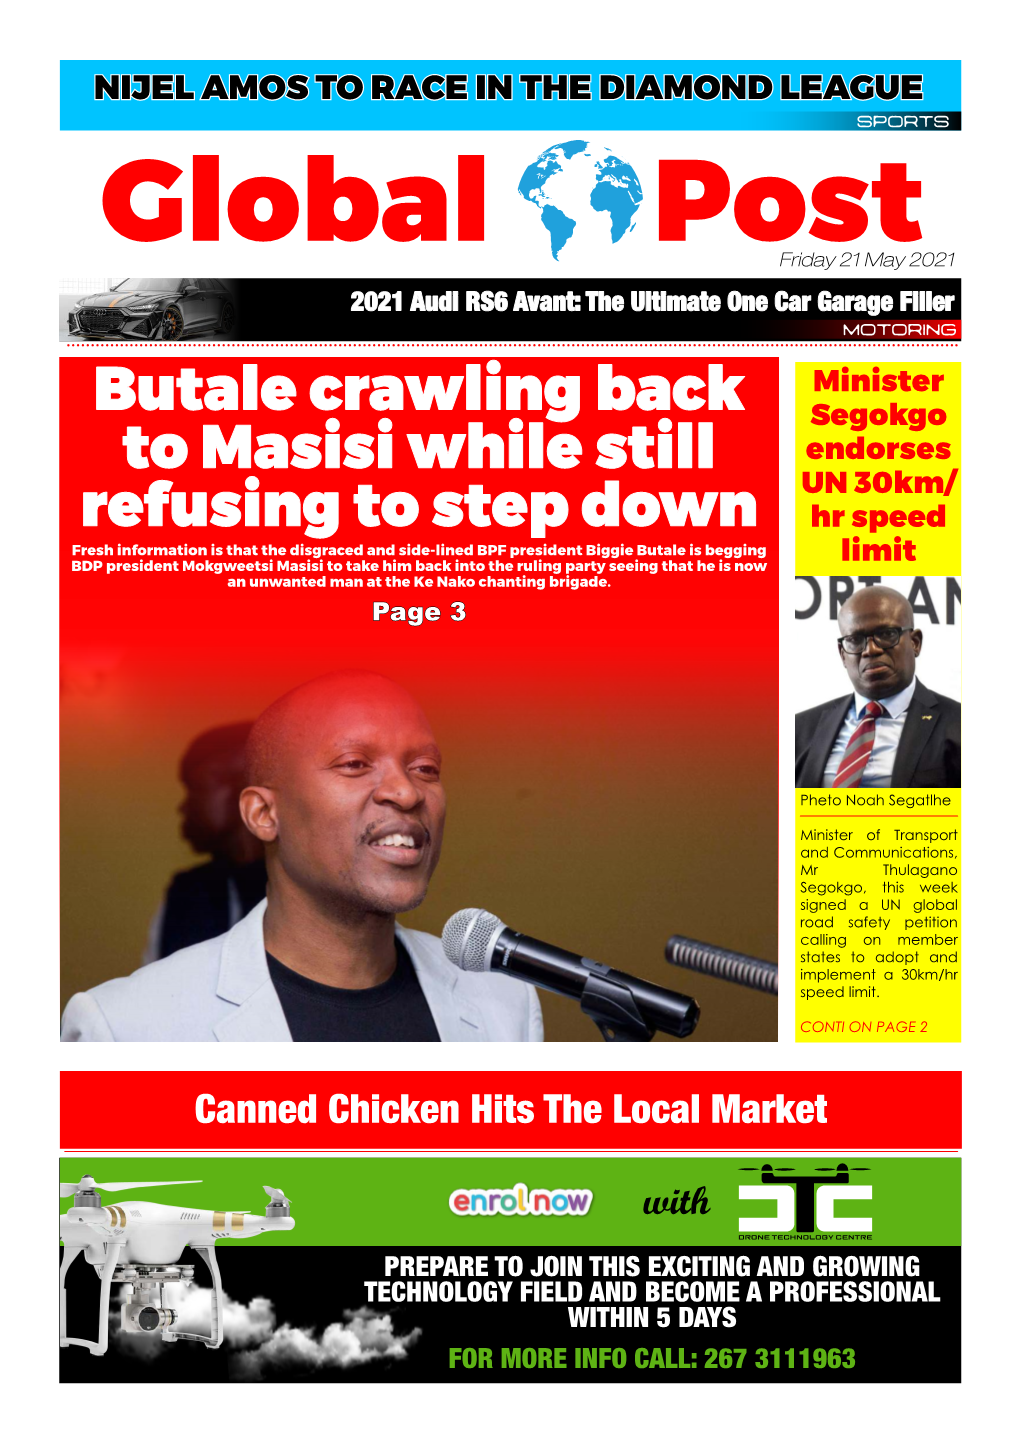 Butale Crawling Back to Masisi While Still Refusing to Step Down